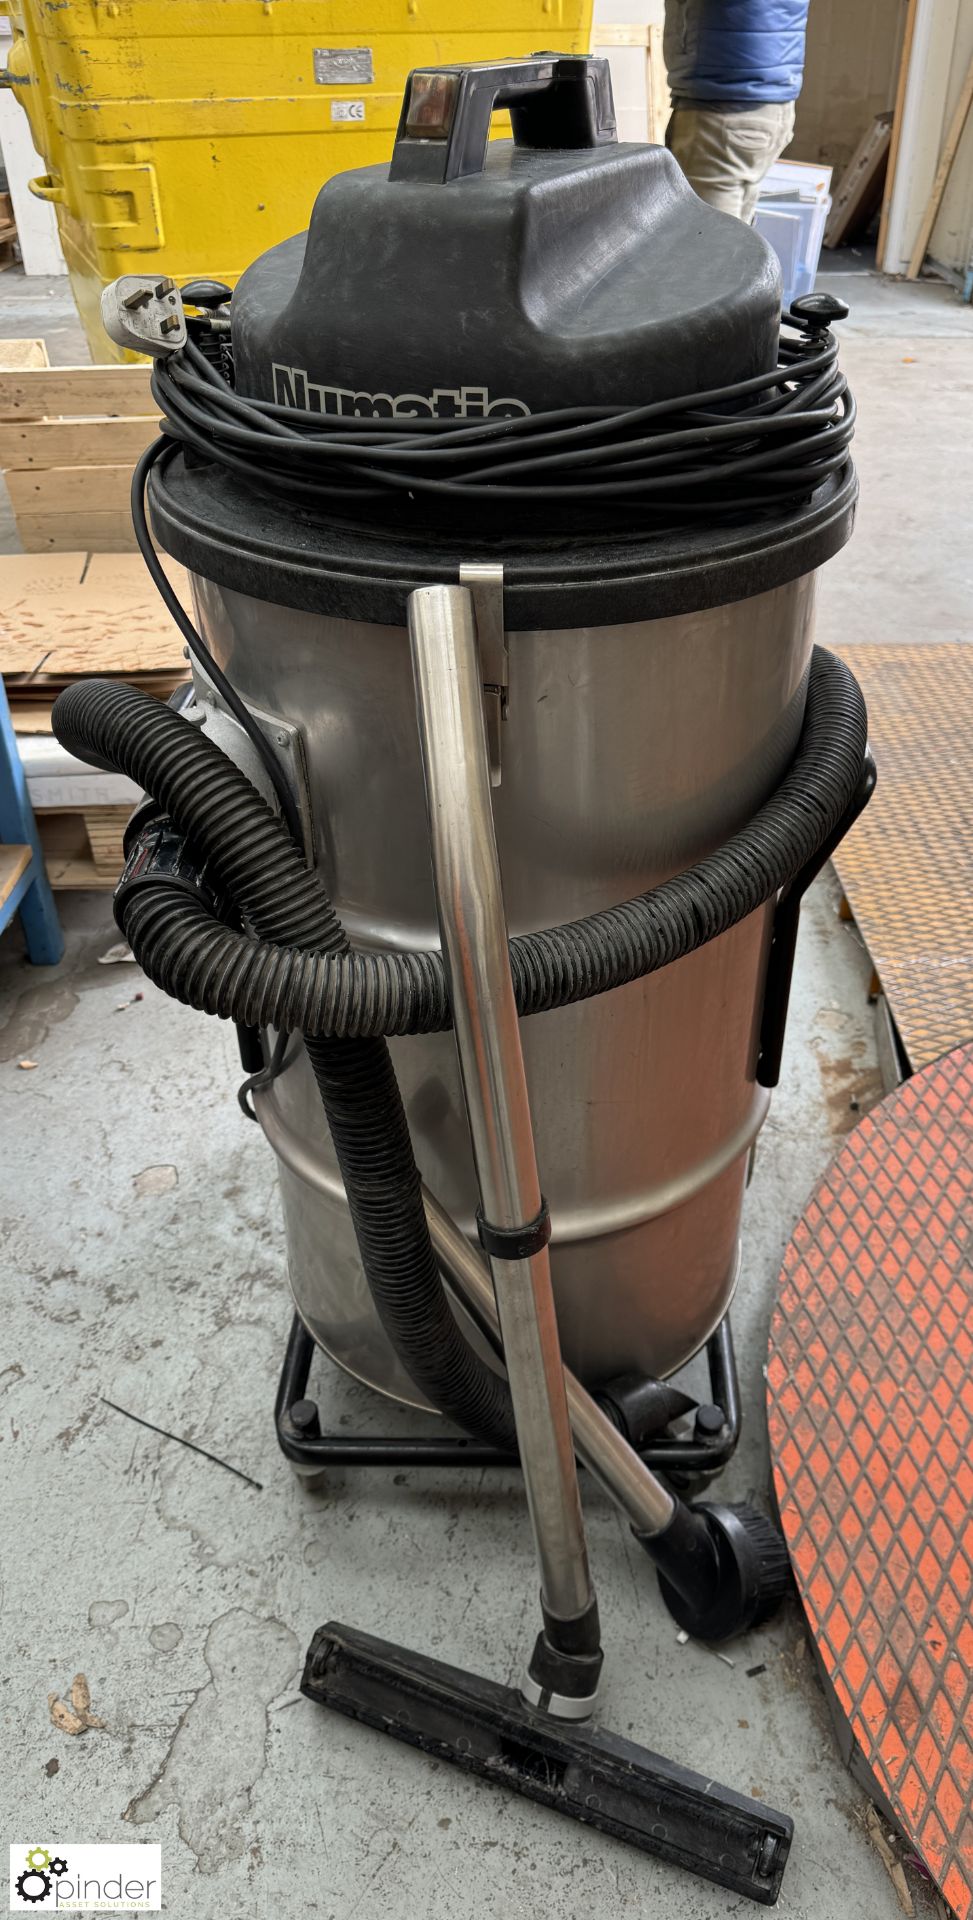 Numatic NTD2003 Industrial Vacuum with hose and attachments, 240volts - Image 2 of 5